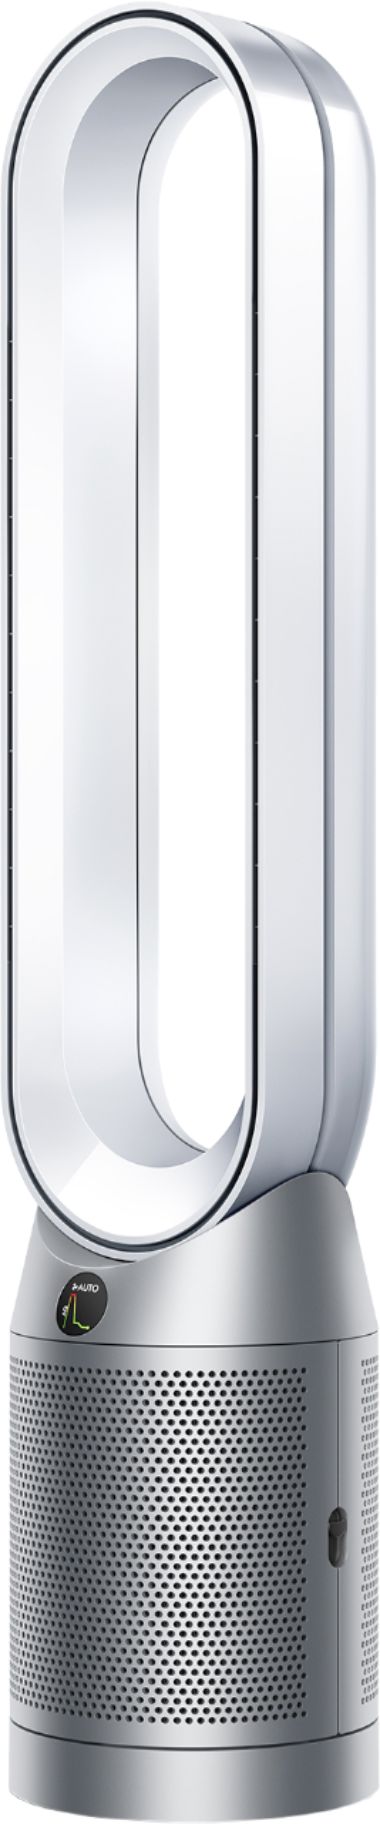 Dyson Purifier Cool TP07 Smart Air Purifier and Fan White/Silver 369803-01  - Best Buy